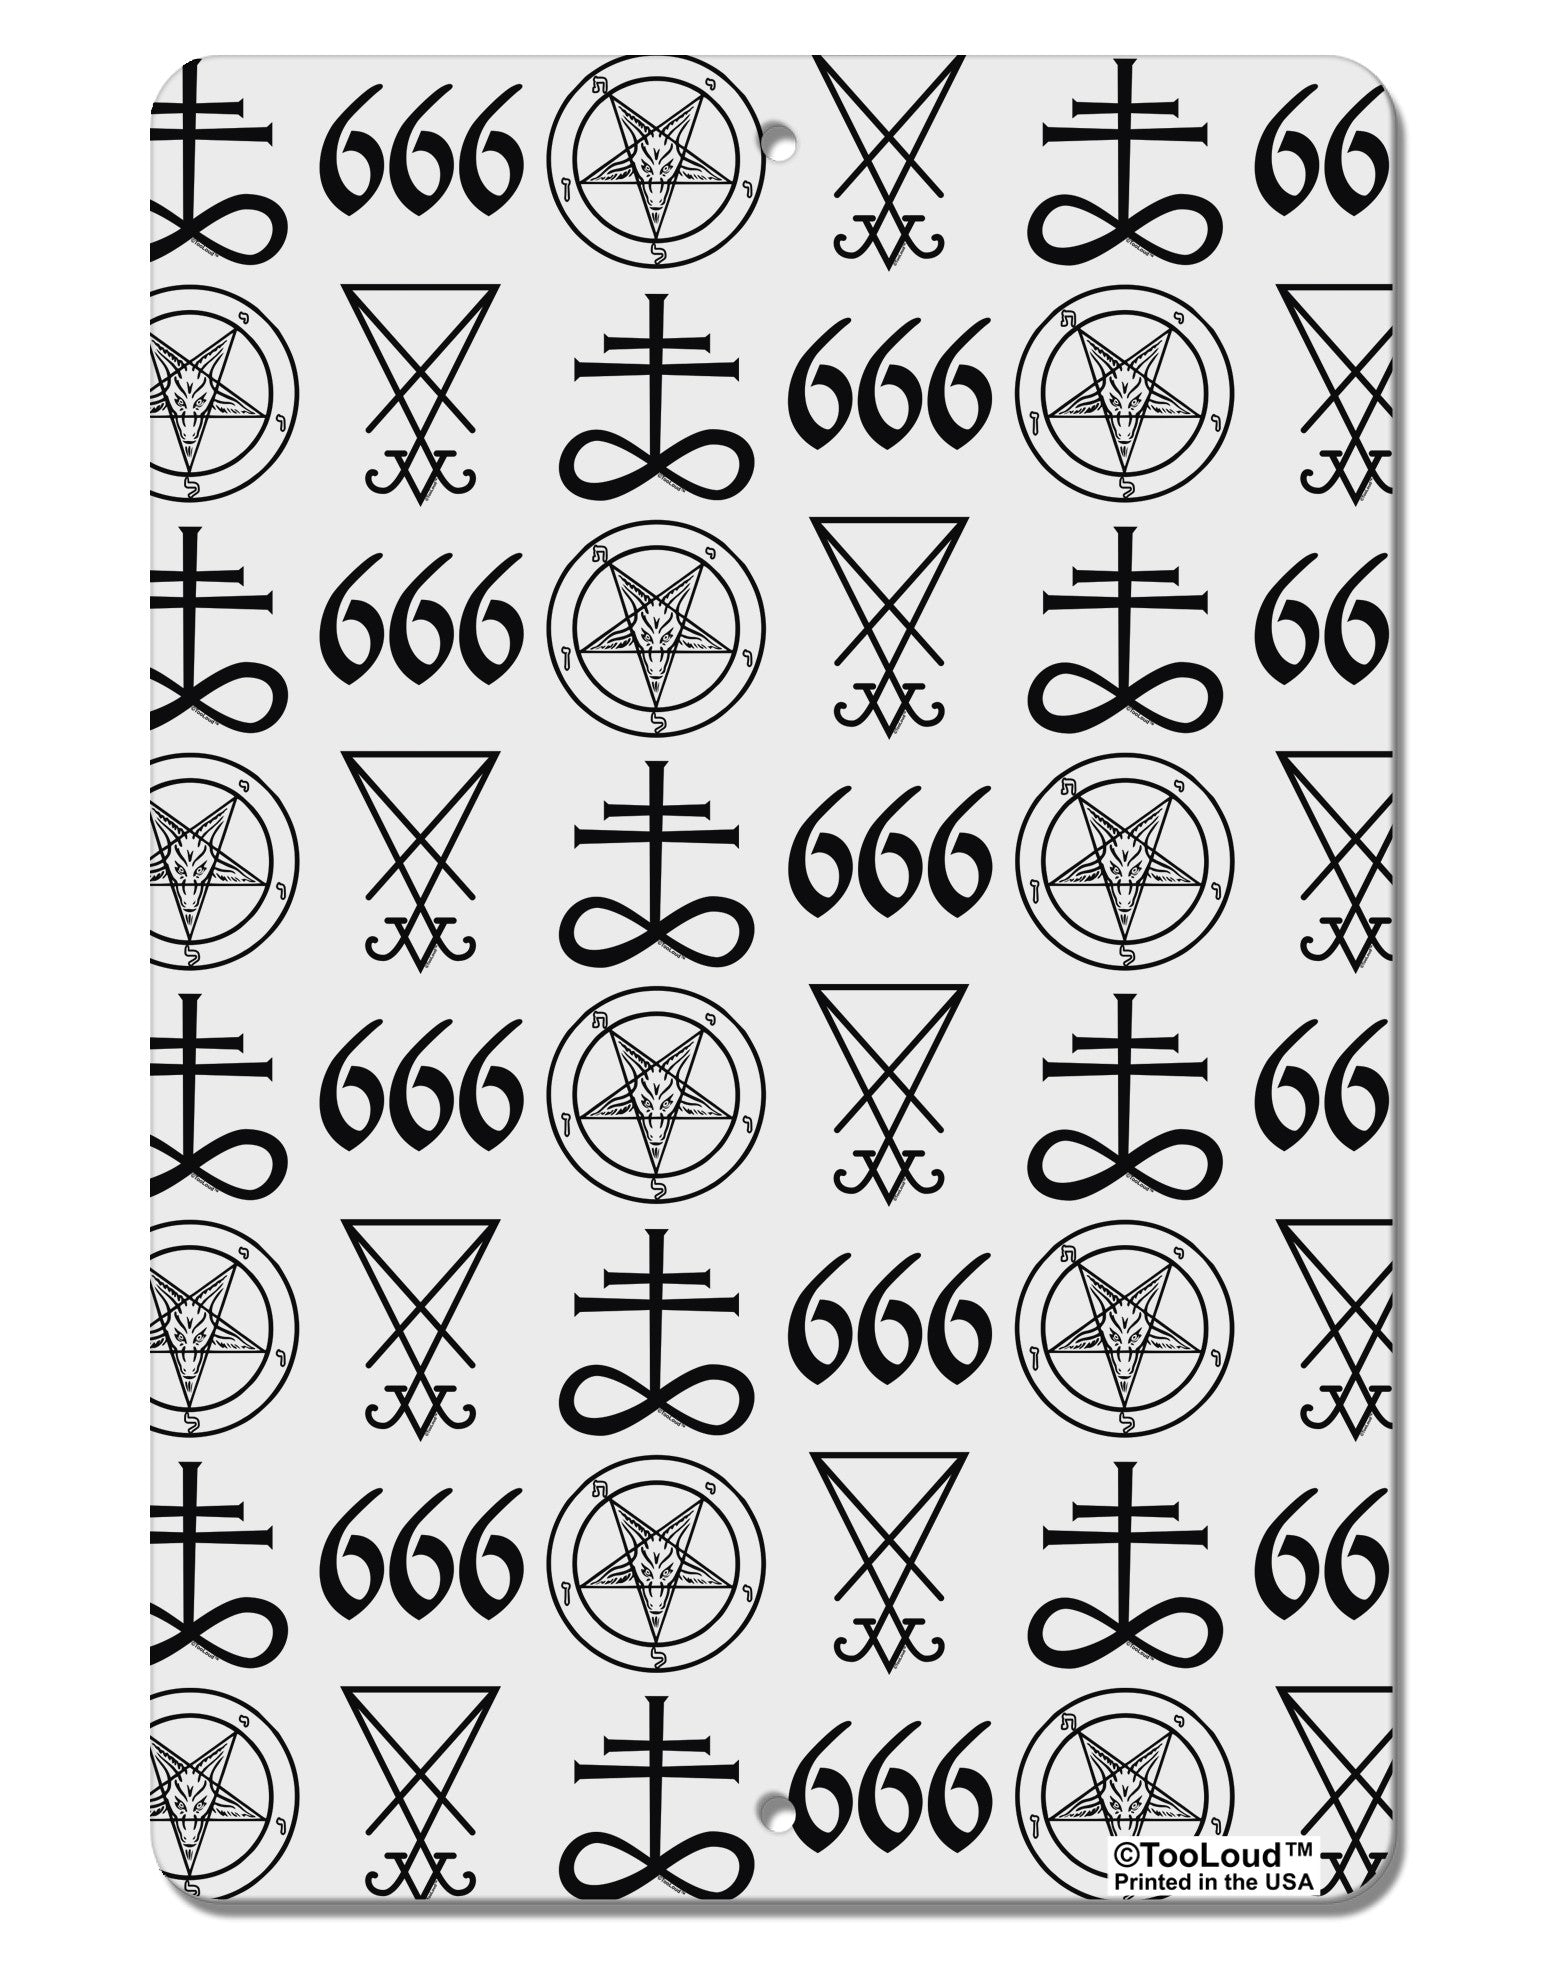 demonic symbols and meanings